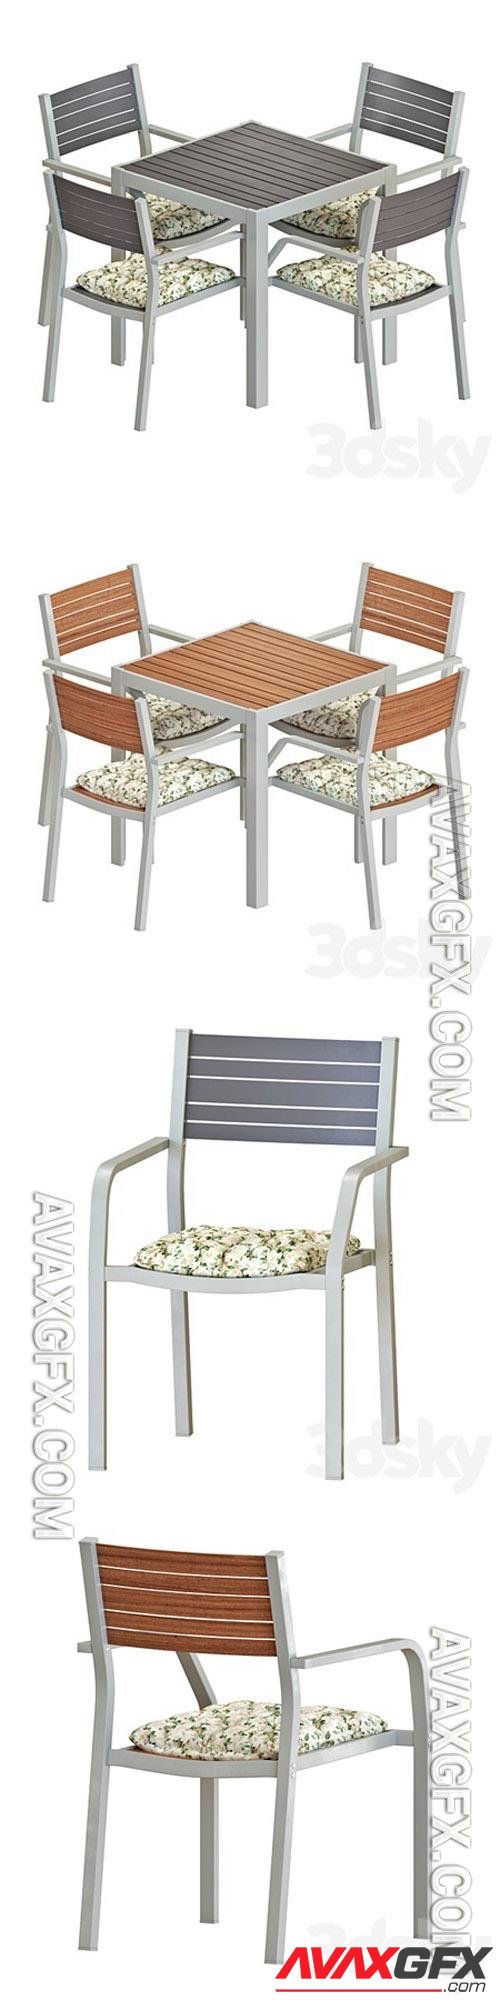 IKEA SJALLAND TABLE AND CHAIRS SET 02 3D Models